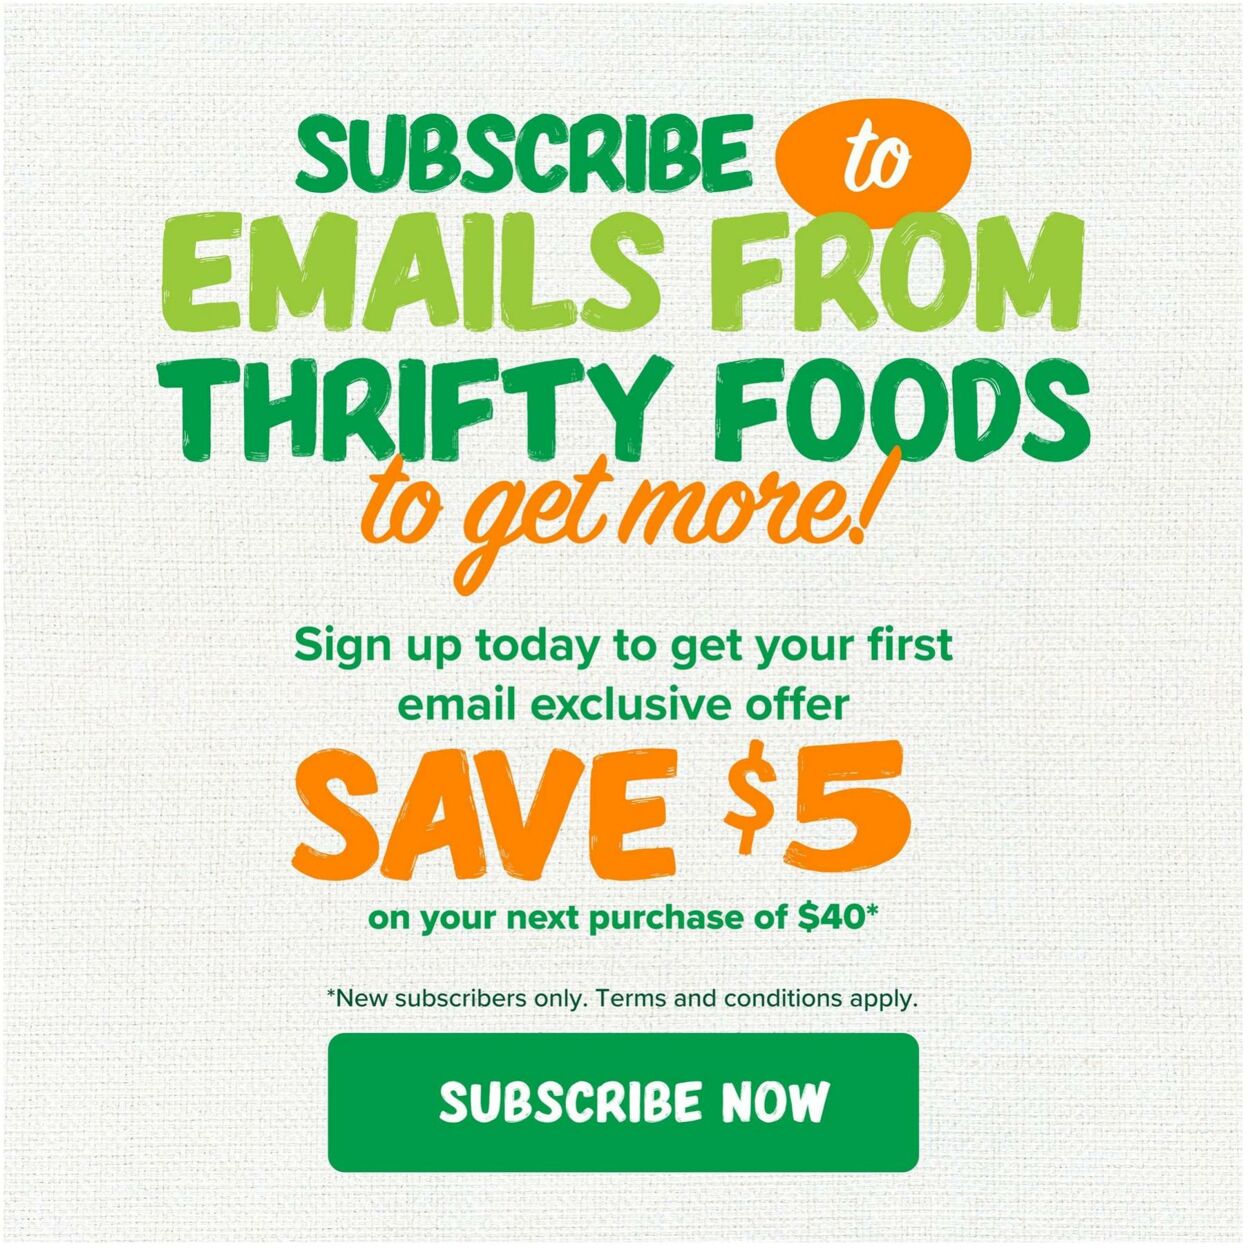 Flyer Thrifty Foods 24.11.2022 - 30.11.2022